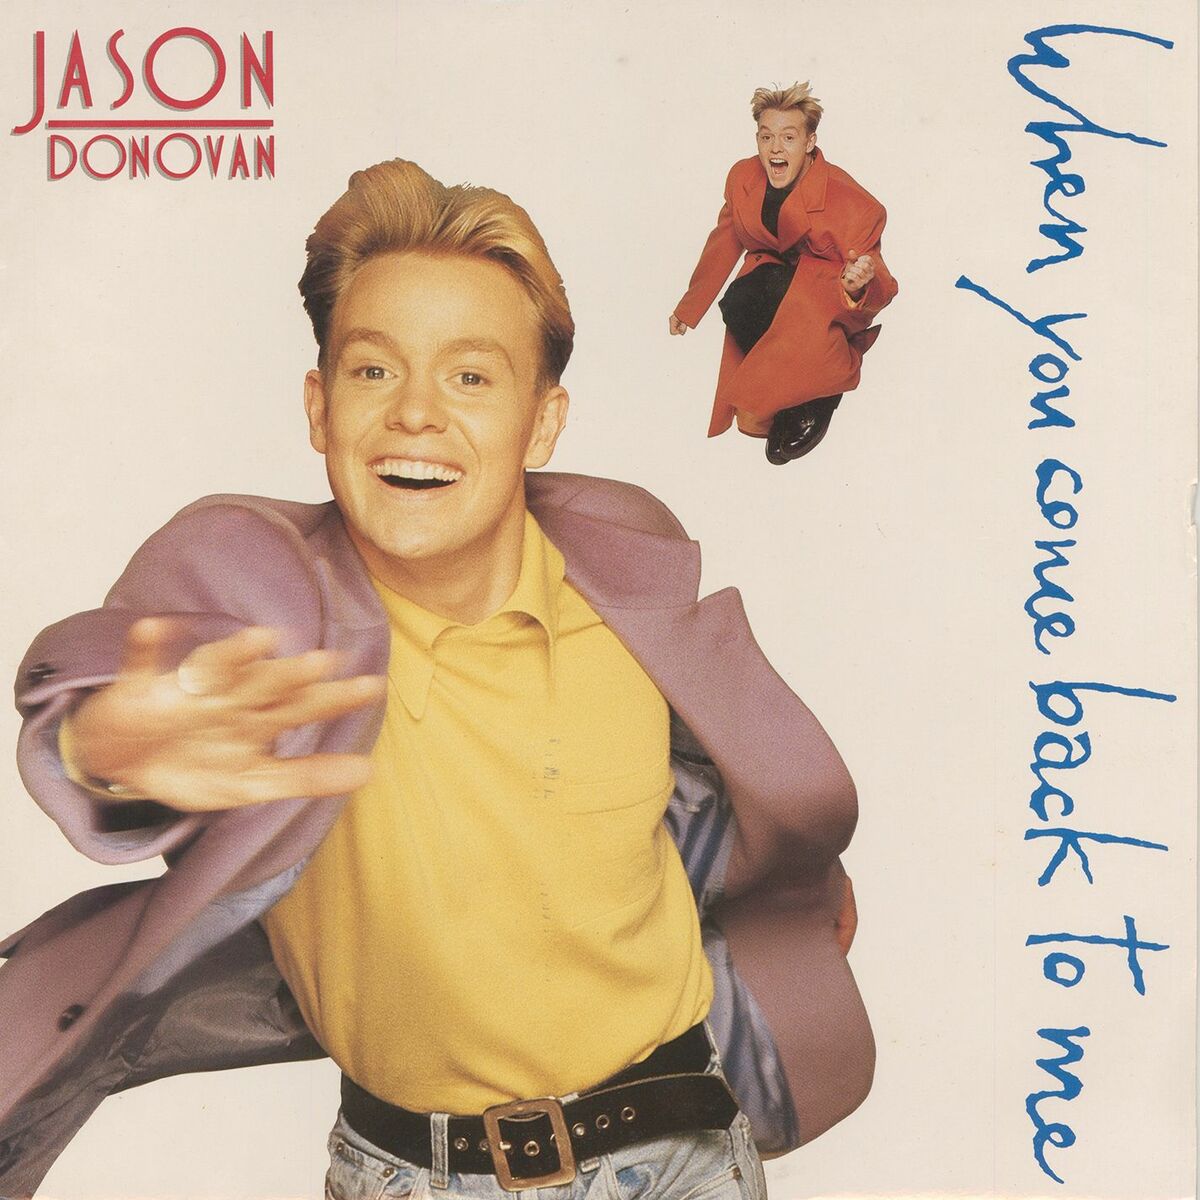 Jason Donovan - When You Come Back to Me: lyrics and songs | Deezer